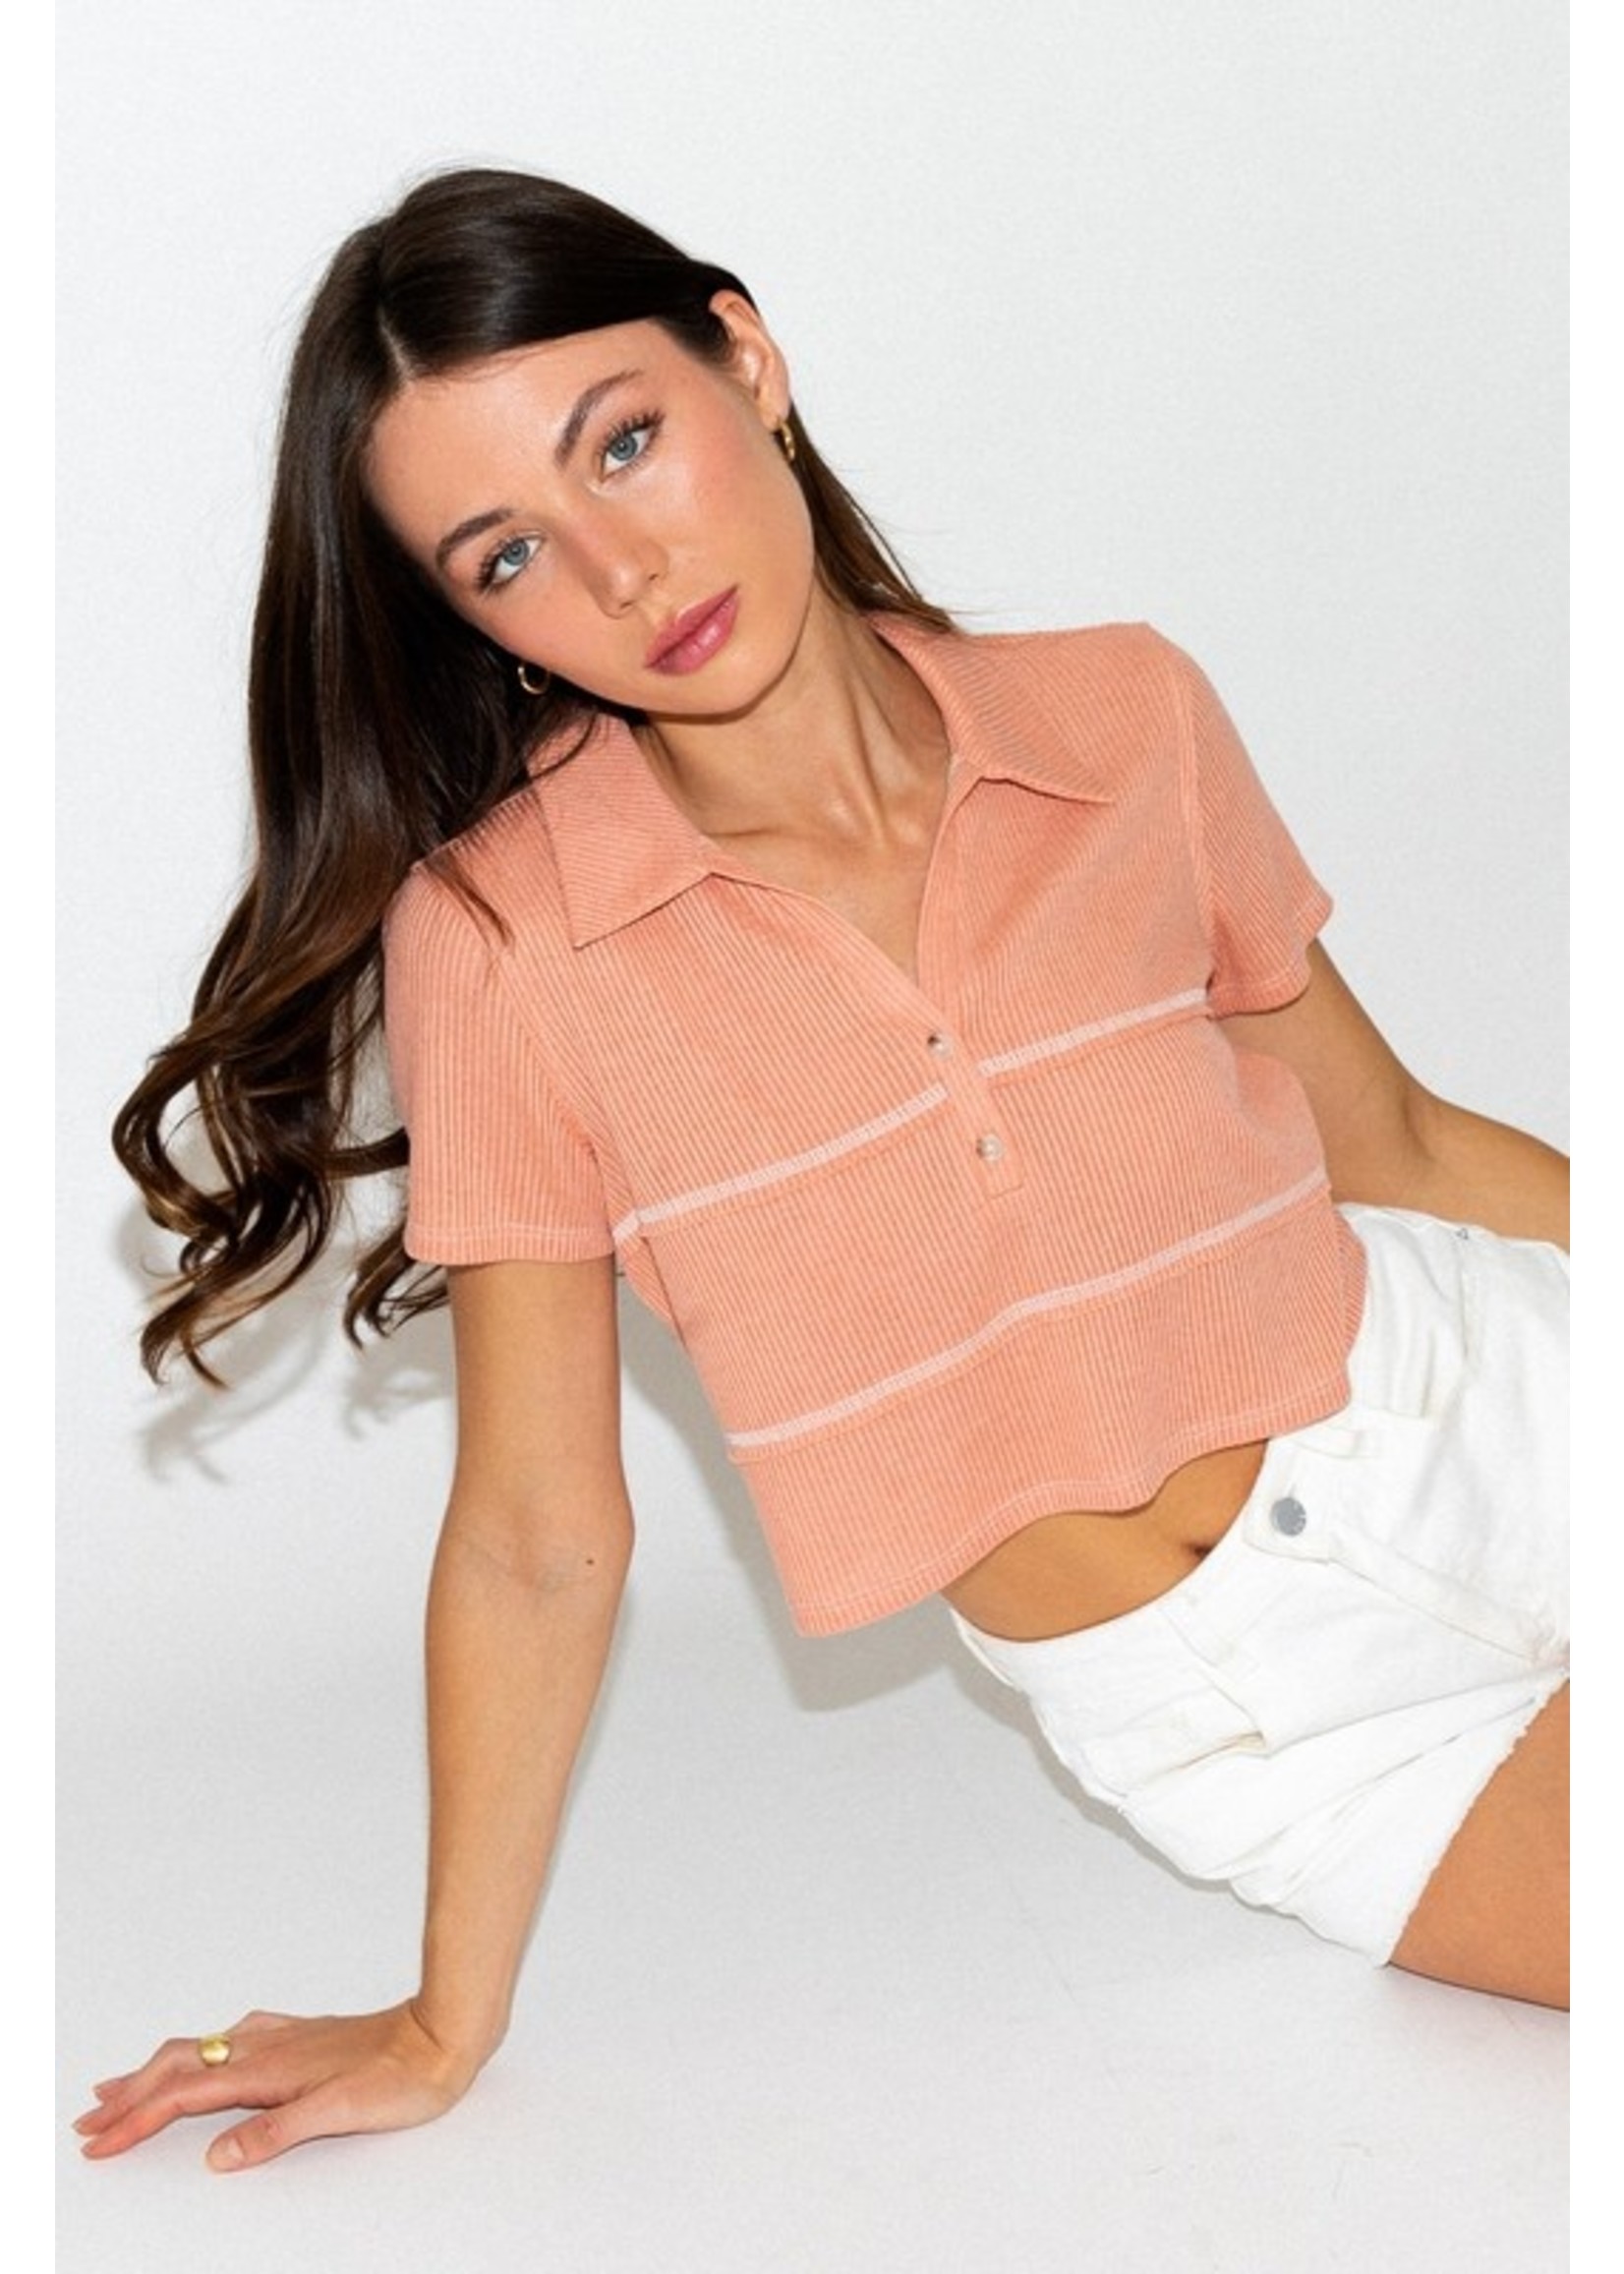 Le Lis Short Sleeve Collared Boxy Top - KT6254